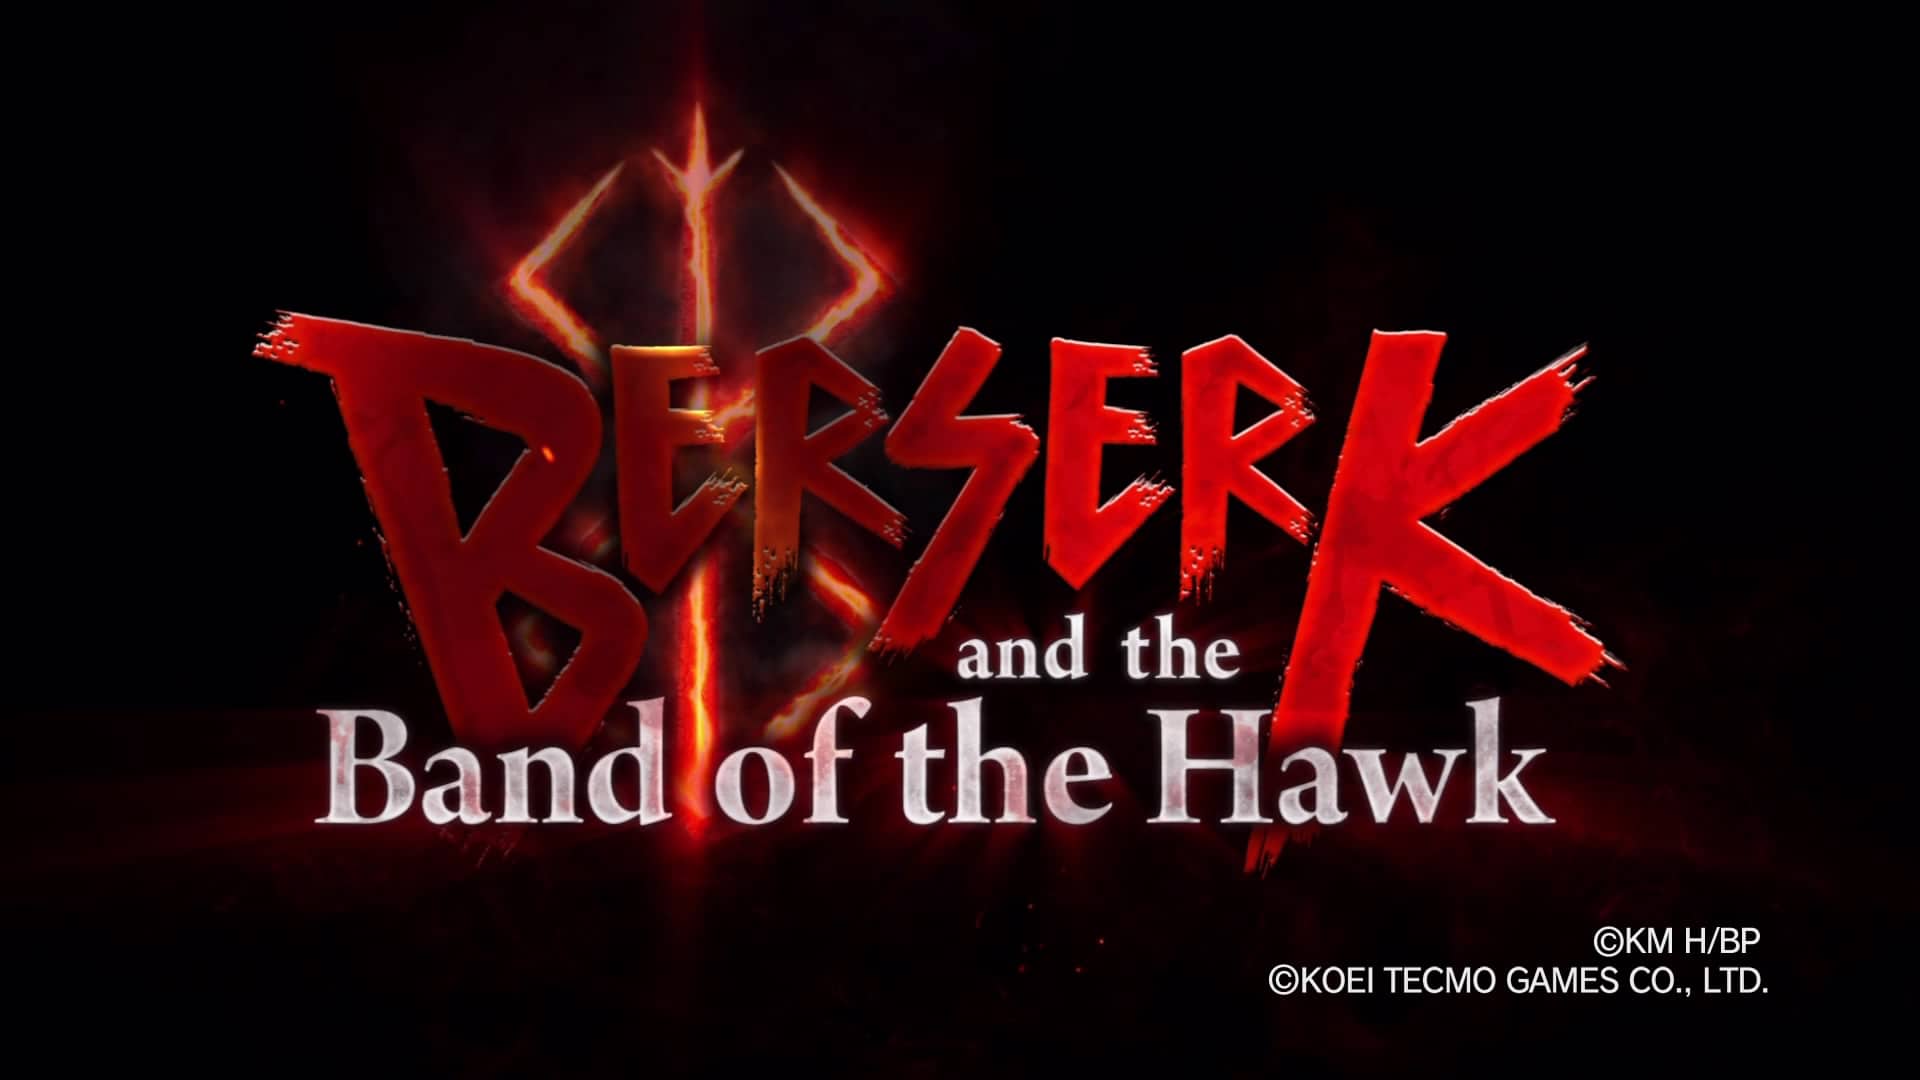 BERSERK and the Band of the Hawk 20170325101303